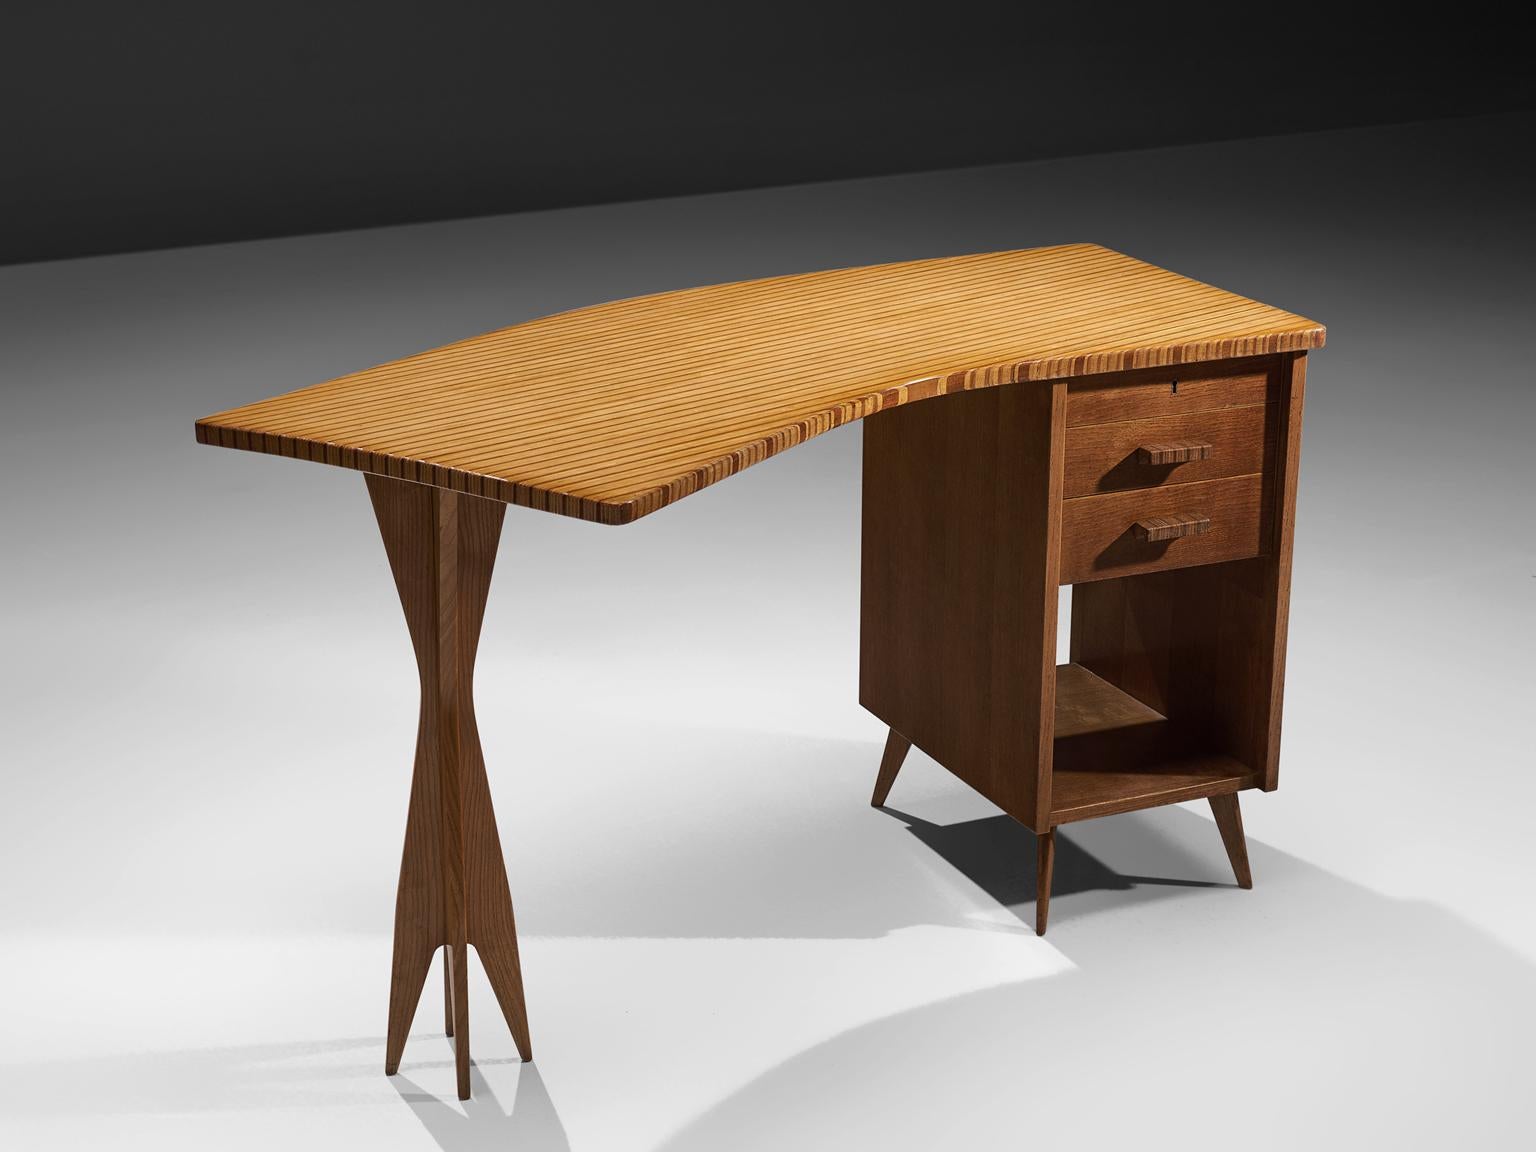 Desk, elm and mahogany, Italy, circa 1950

This delicate, sculptural desk and chair are designed in Italy, circa 1950. This sculptural way of designing has a lot in common with the design of Carlo Molino and Carlo de Carli. The piece has several